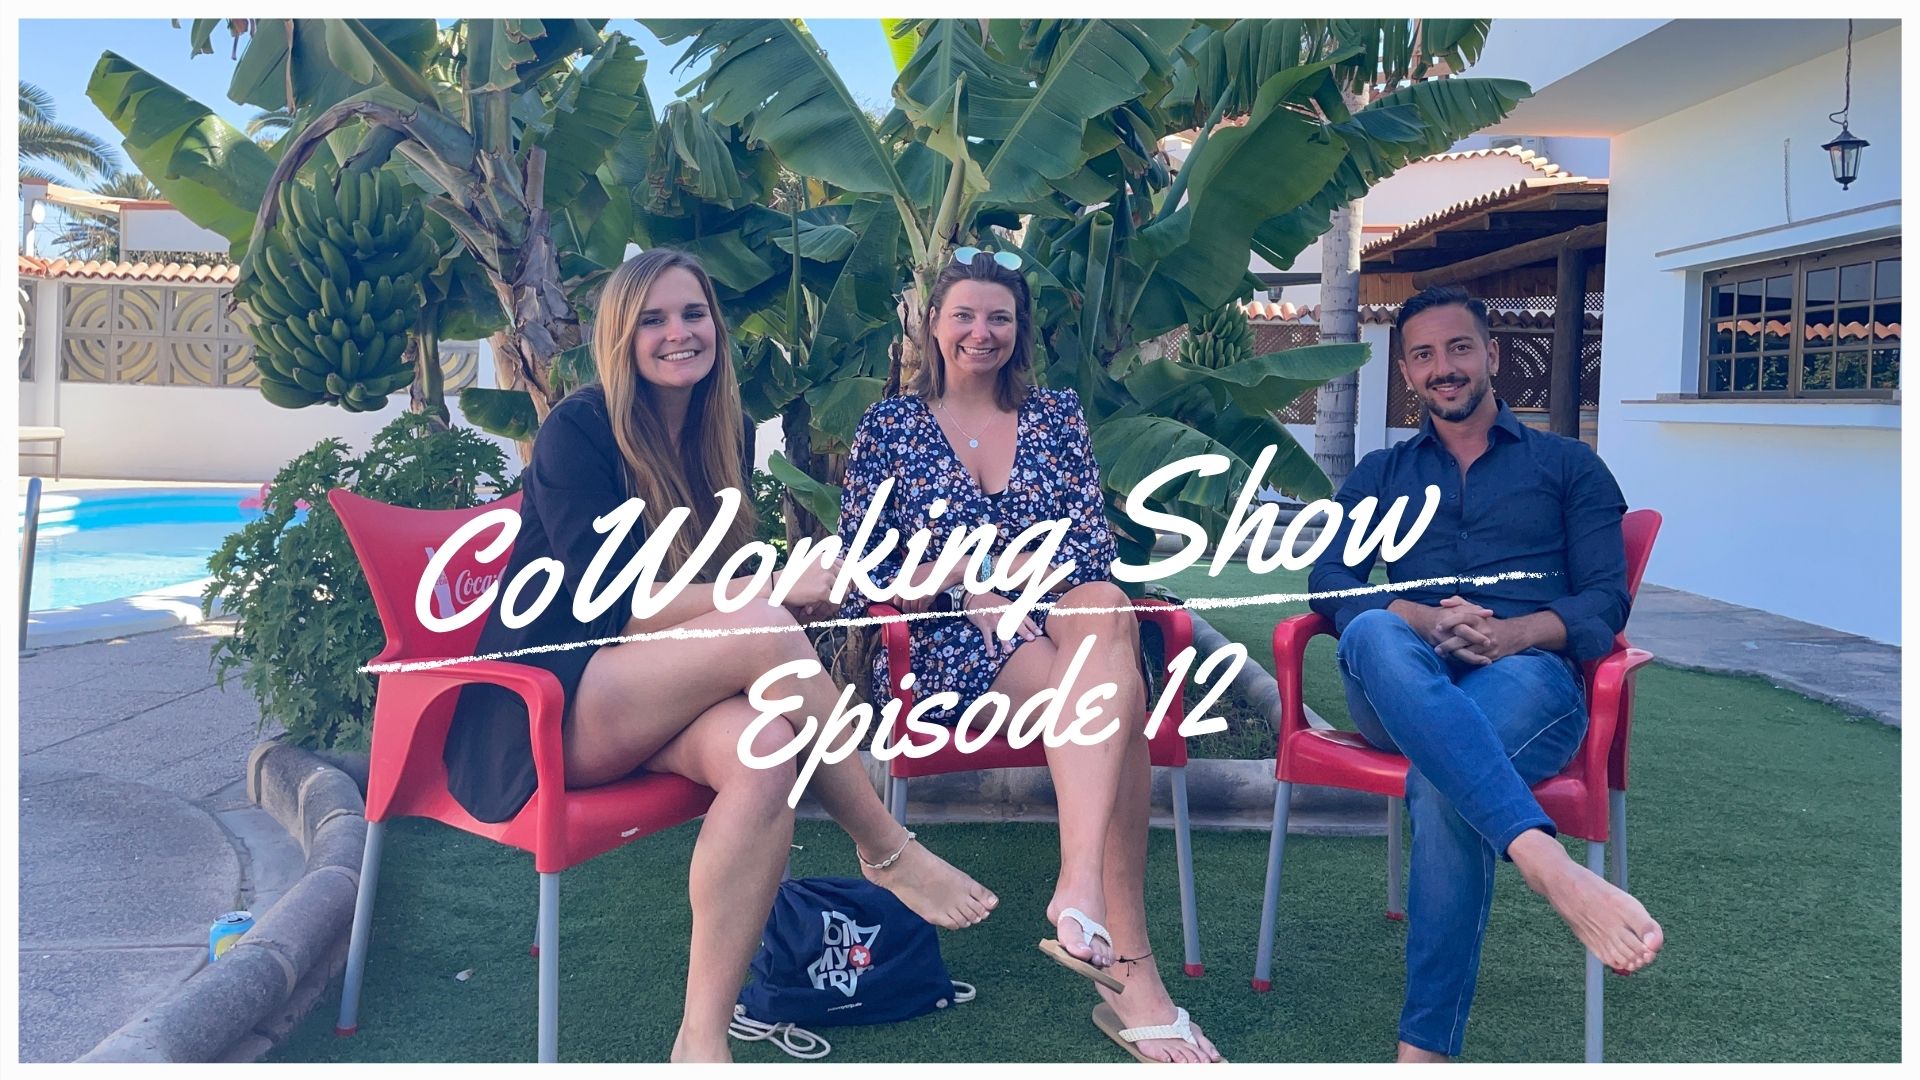 Remote Professionals Experiences with JMT Coworking Trips | CoWorking Show